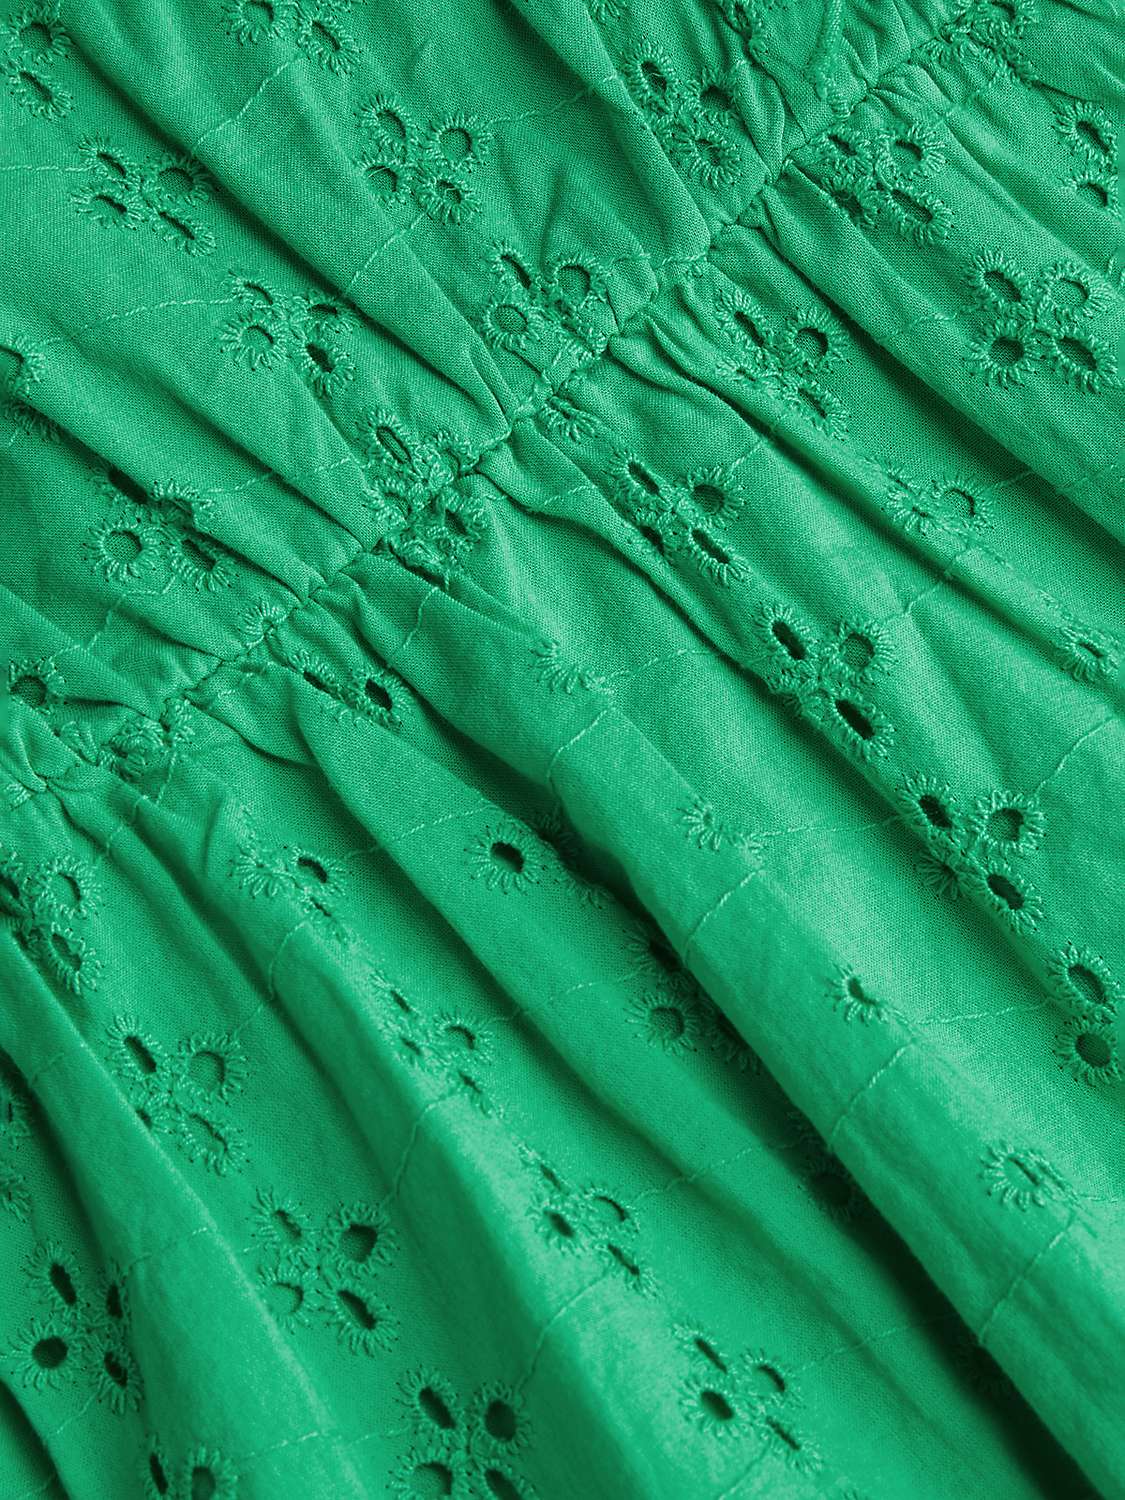 Buy Monsoon Kids' Broderie Anglaise Frill Dress, Green Online at johnlewis.com